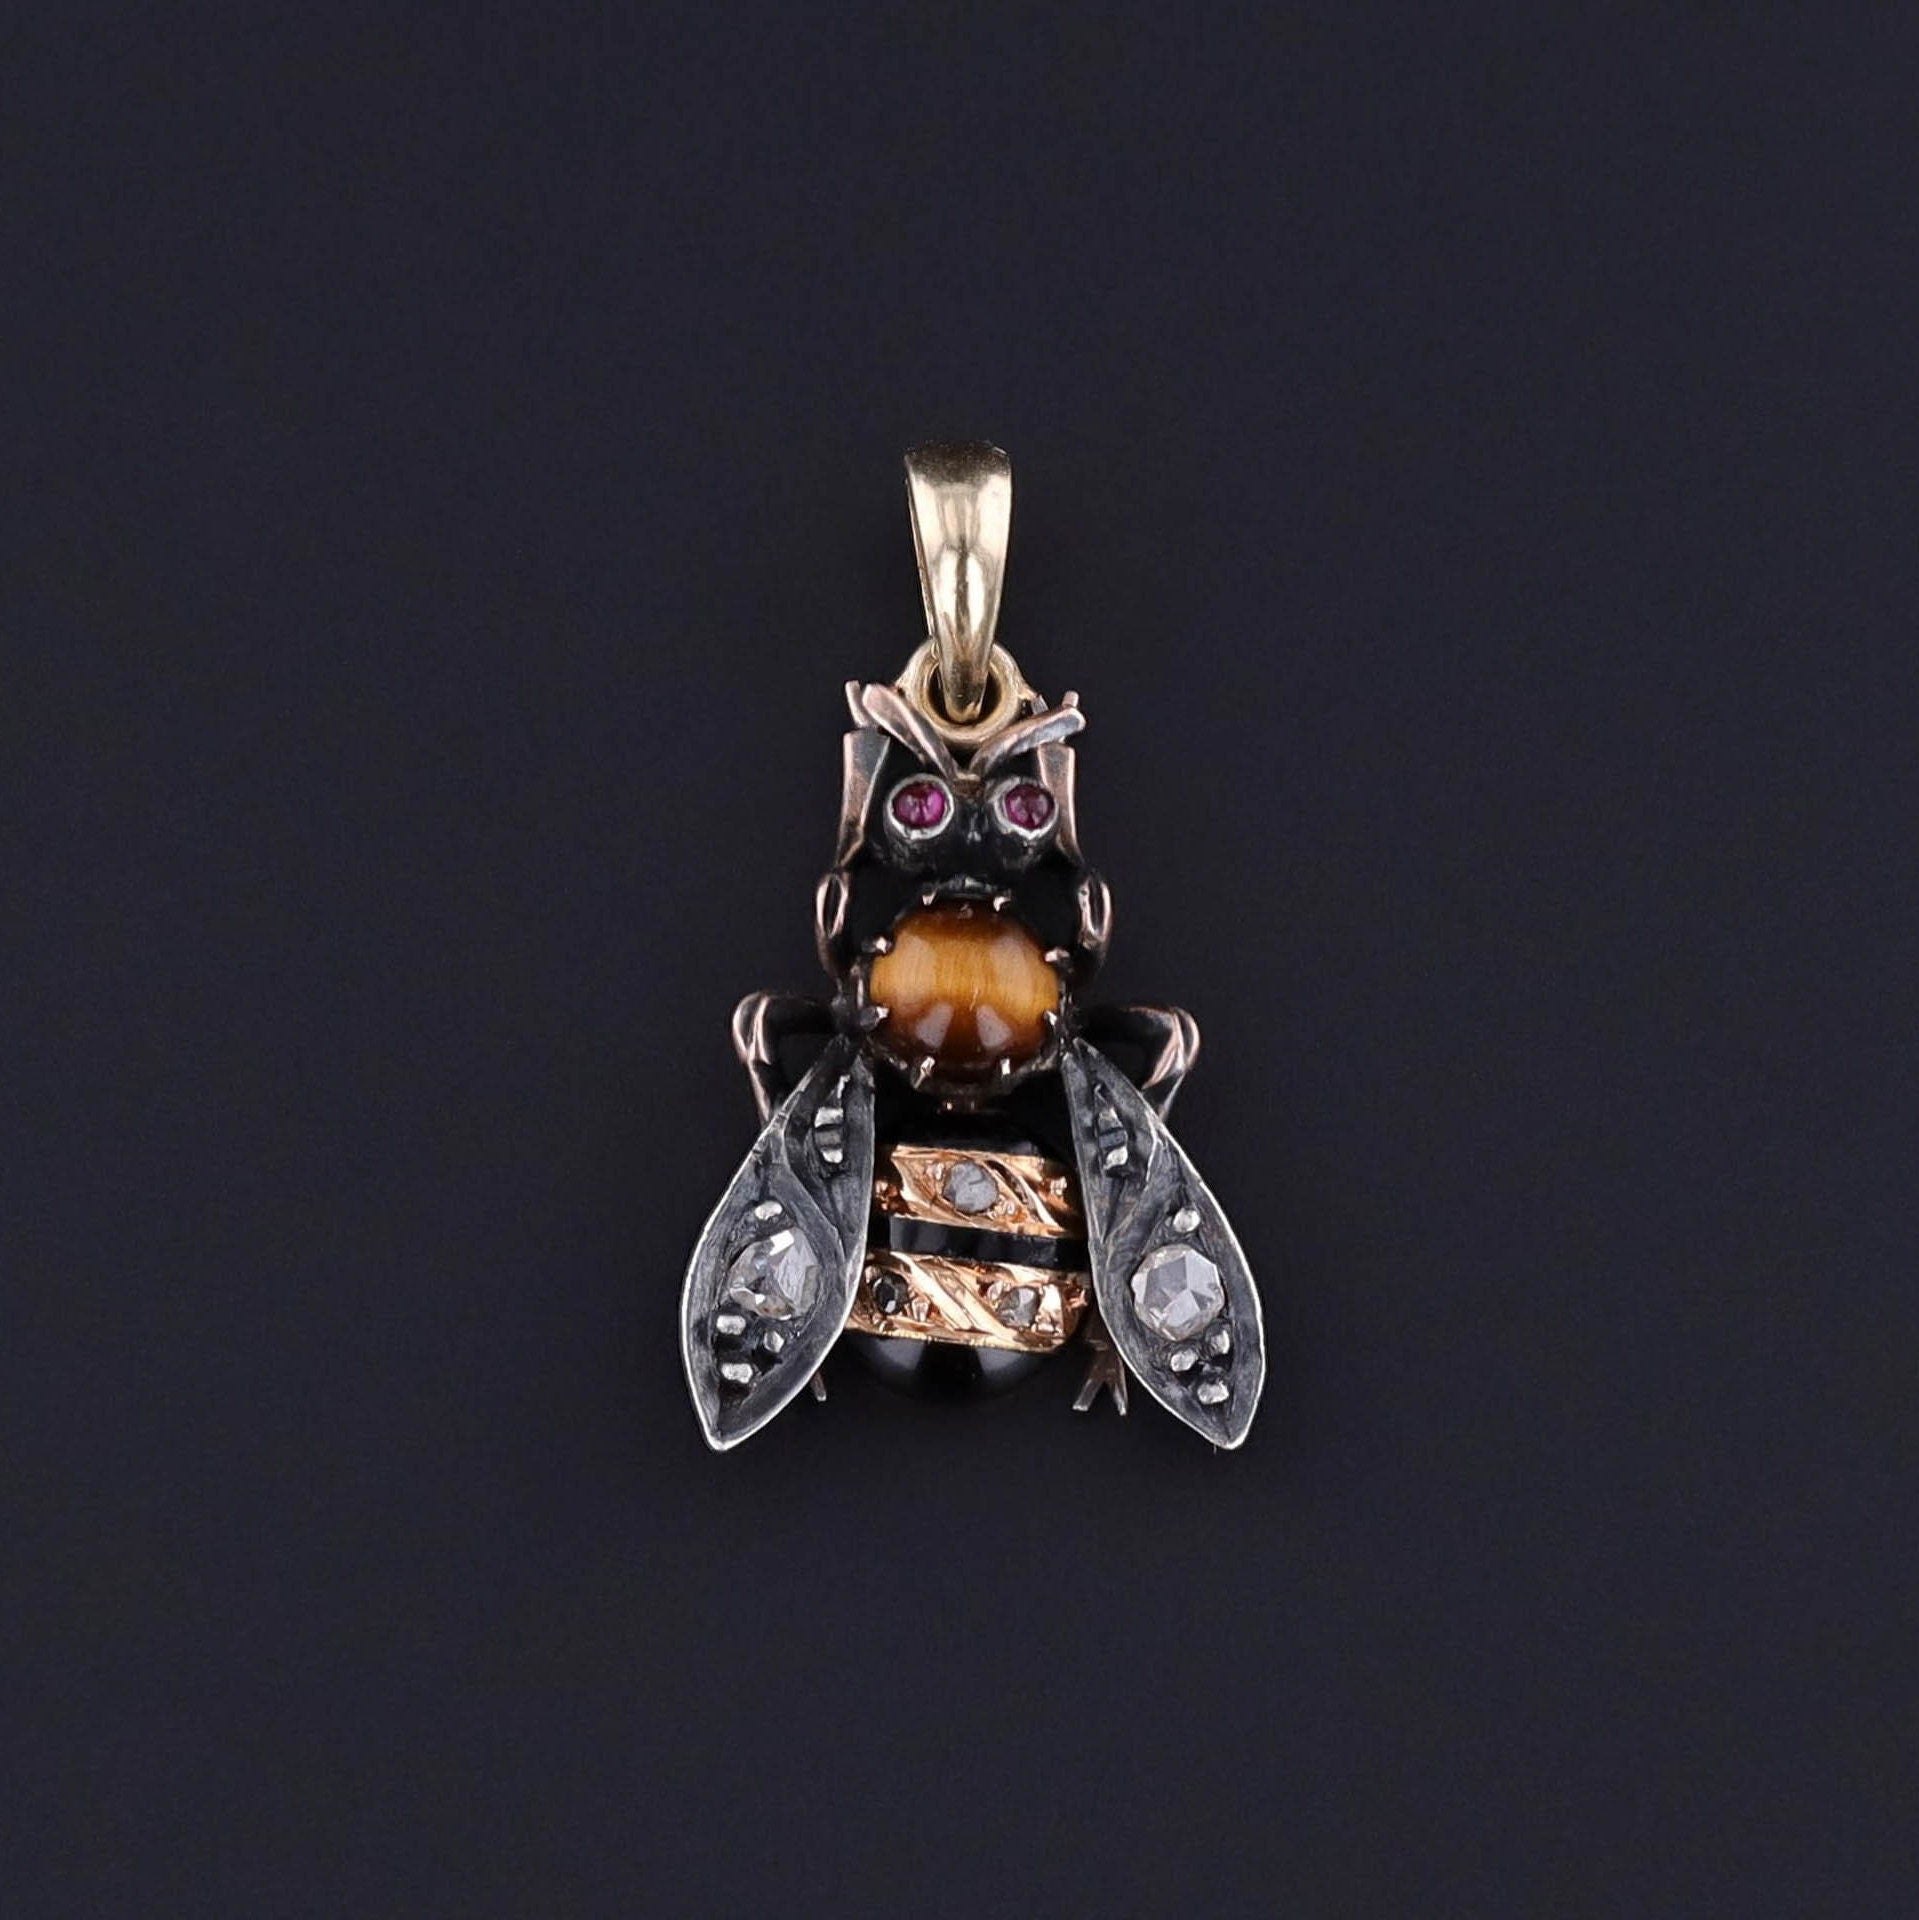 An antique enamel, diamond, and tiger&#39;s eye bee pendant created from a stickpin dating to the late Victorian era. Perfect for any lover of bees or antique jewelry collector.